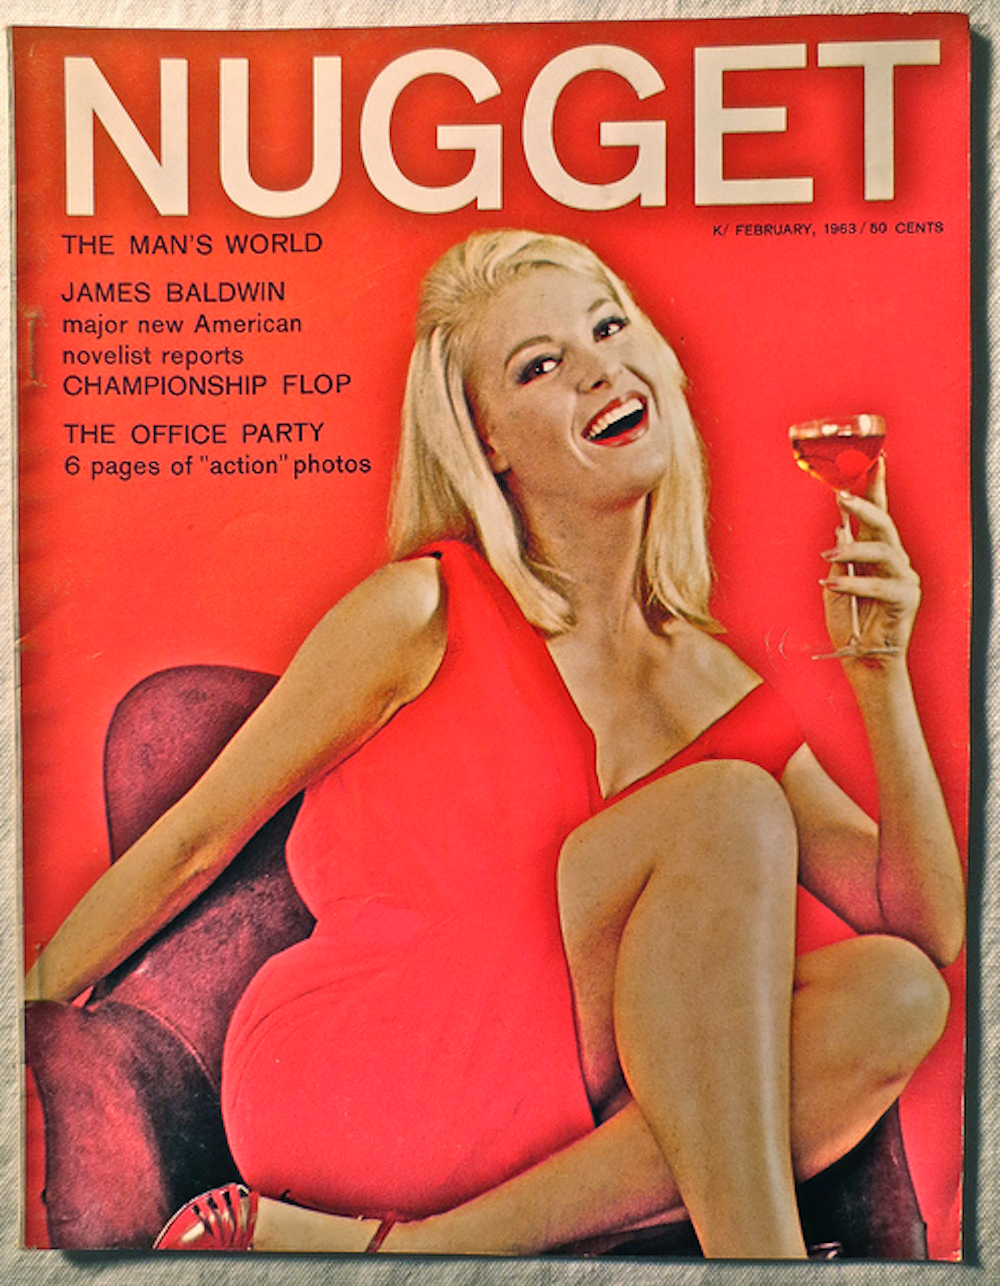 Vintage Urban Nudist - How Playboy skirted the anti-porn crusade of the 1950s